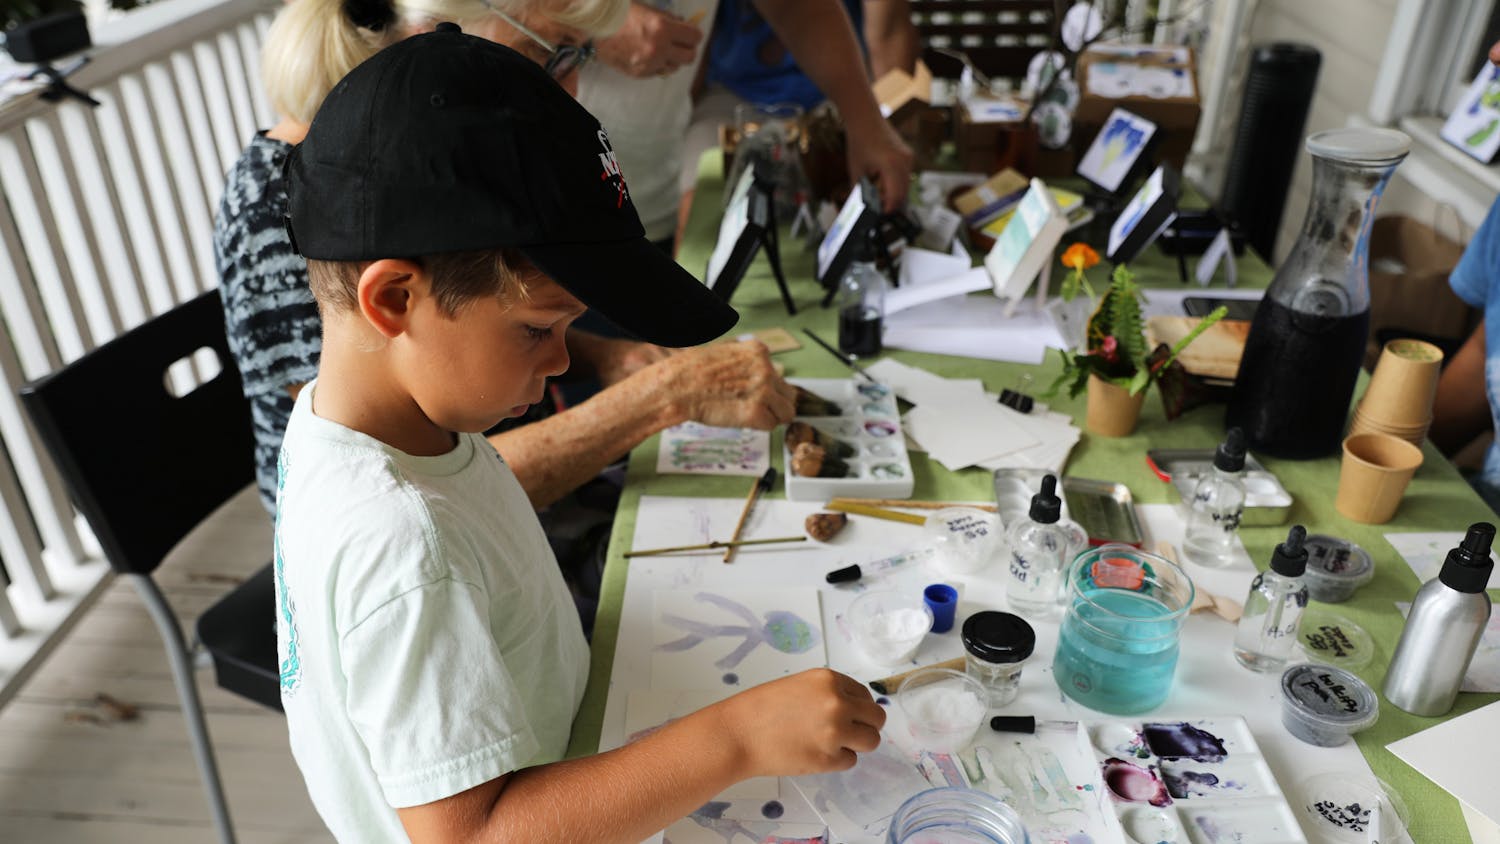 Dylan Perez, 6, uses blue butterfly flower pigment to paint on reusable paper at an eco-art event on Saturday, June 12, 2021. 